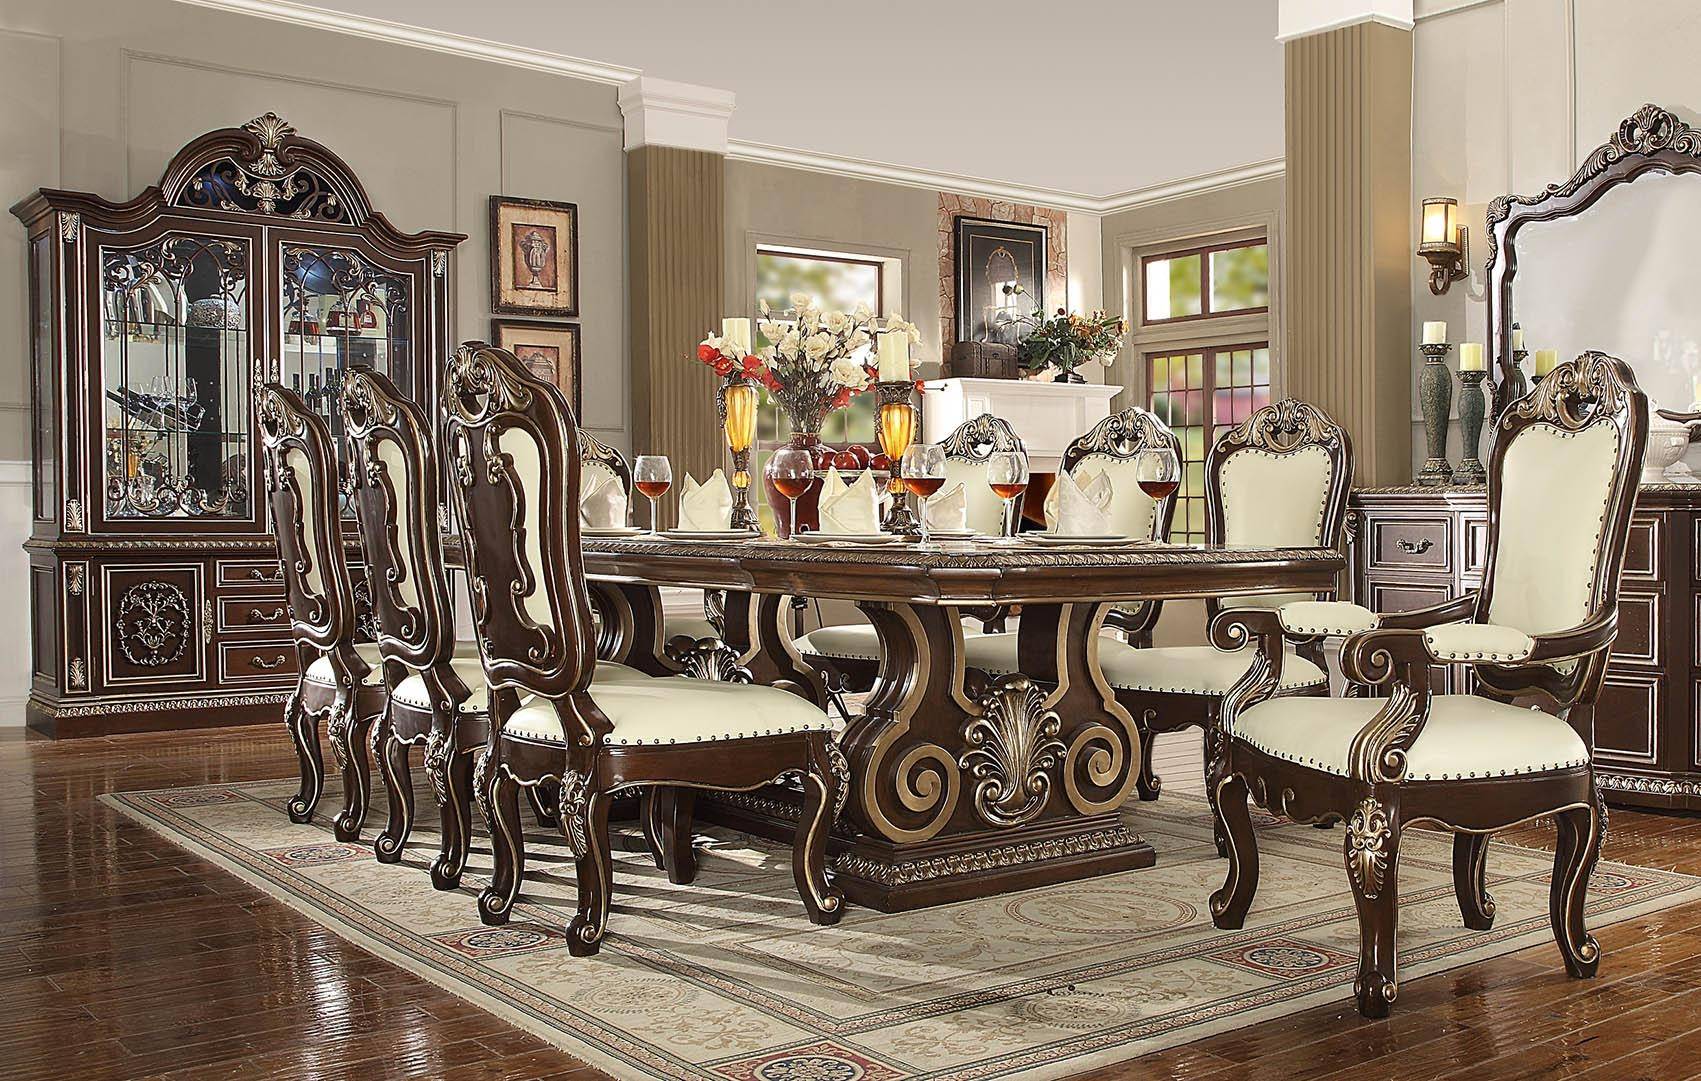 Buy Homey Design Hd 8013 Dining Table In Ivory Dark Cherry Wood Online